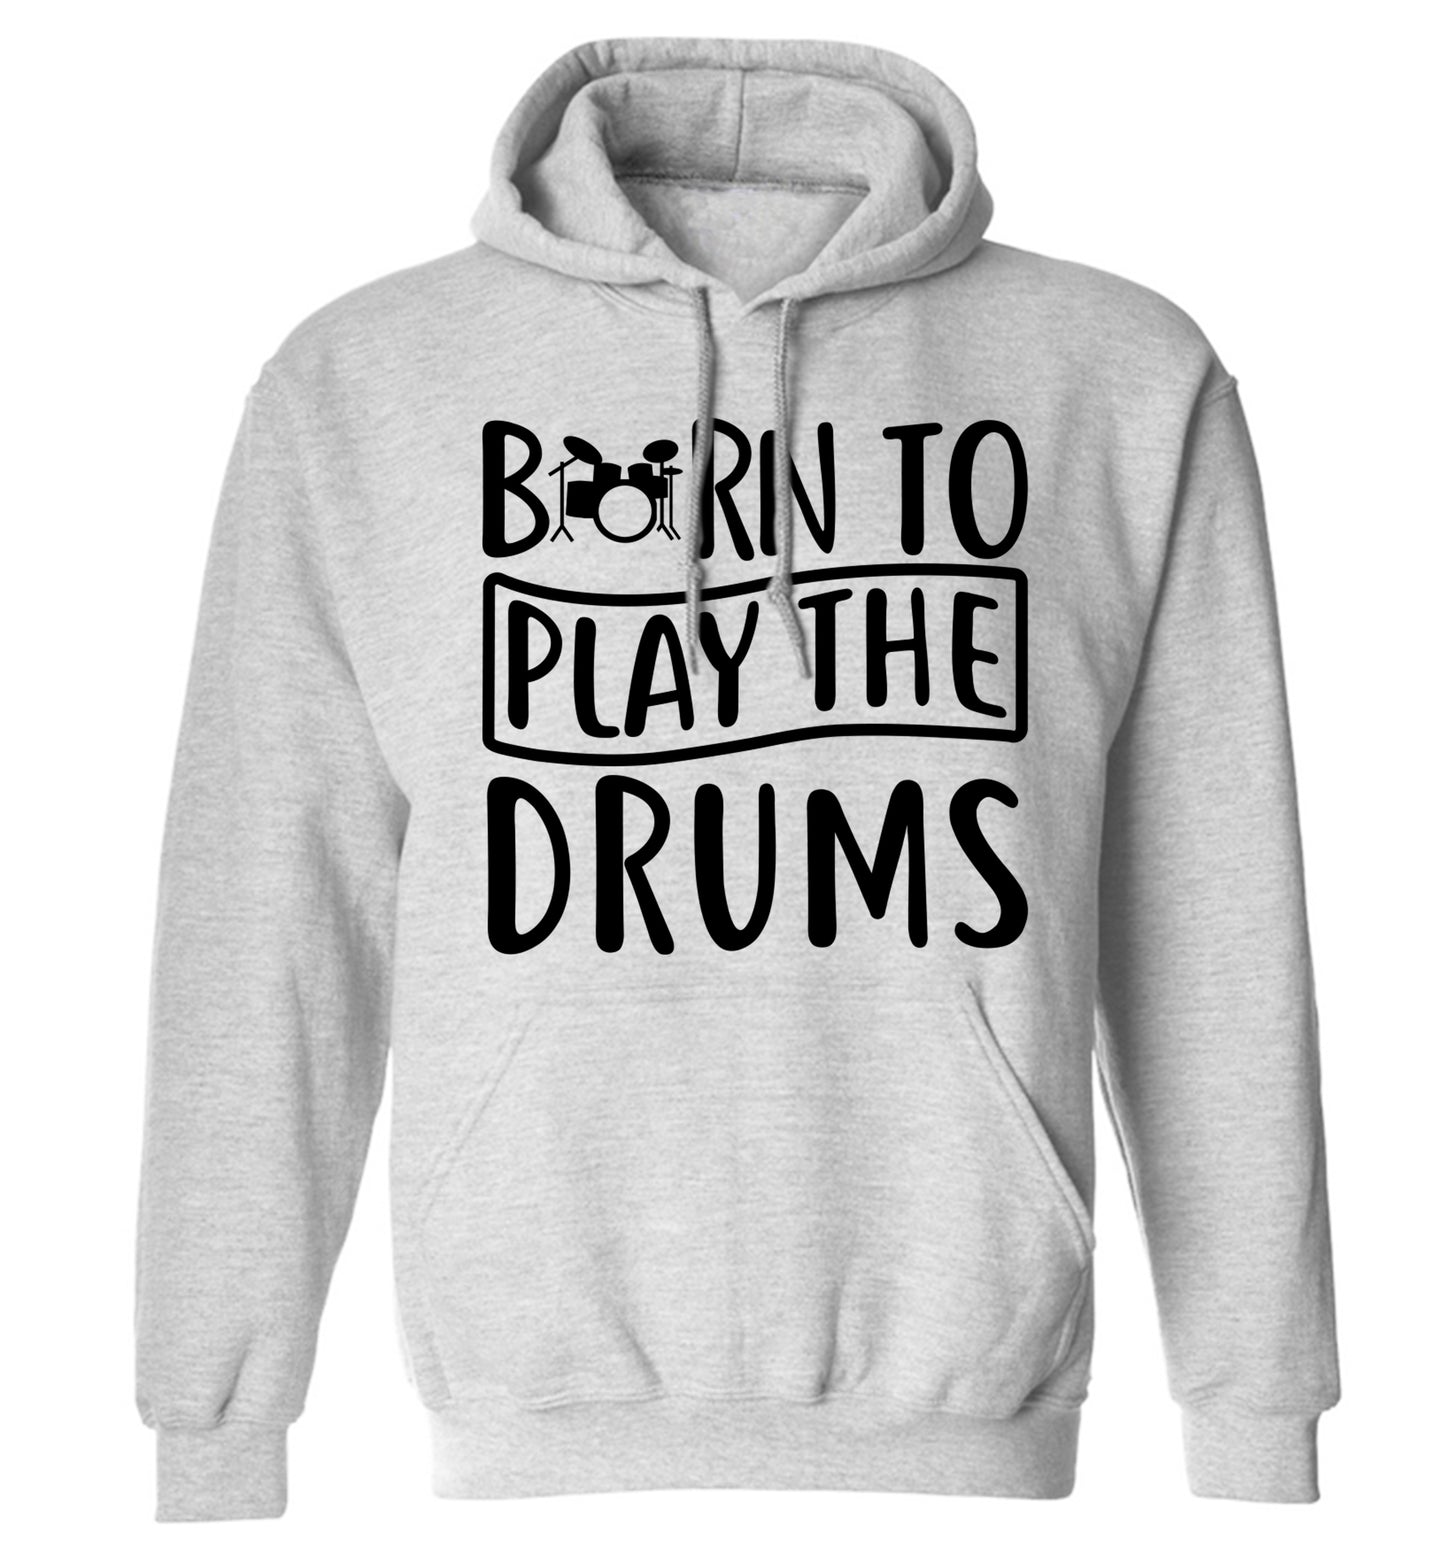 Born to play the drums adults unisex grey hoodie 2XL